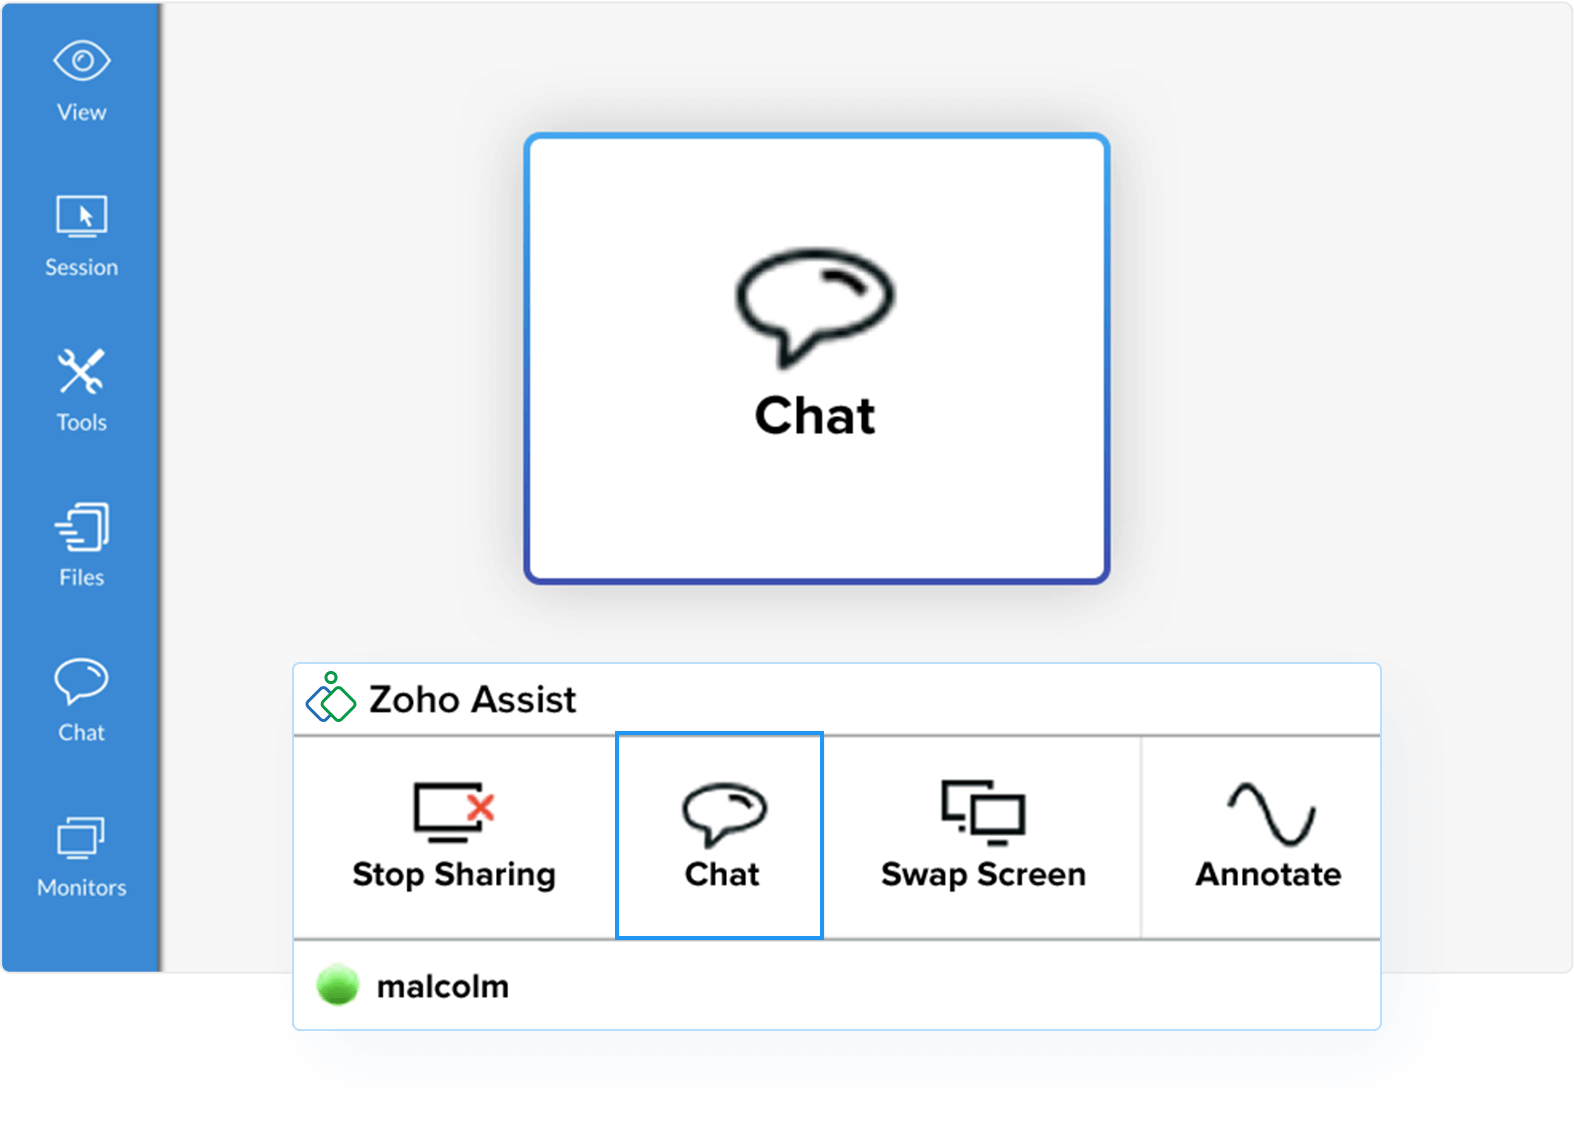 Chat instantly in Mac remote desktop - Zoho Assist TITLE : Chat instantly in Mac remote desktop 